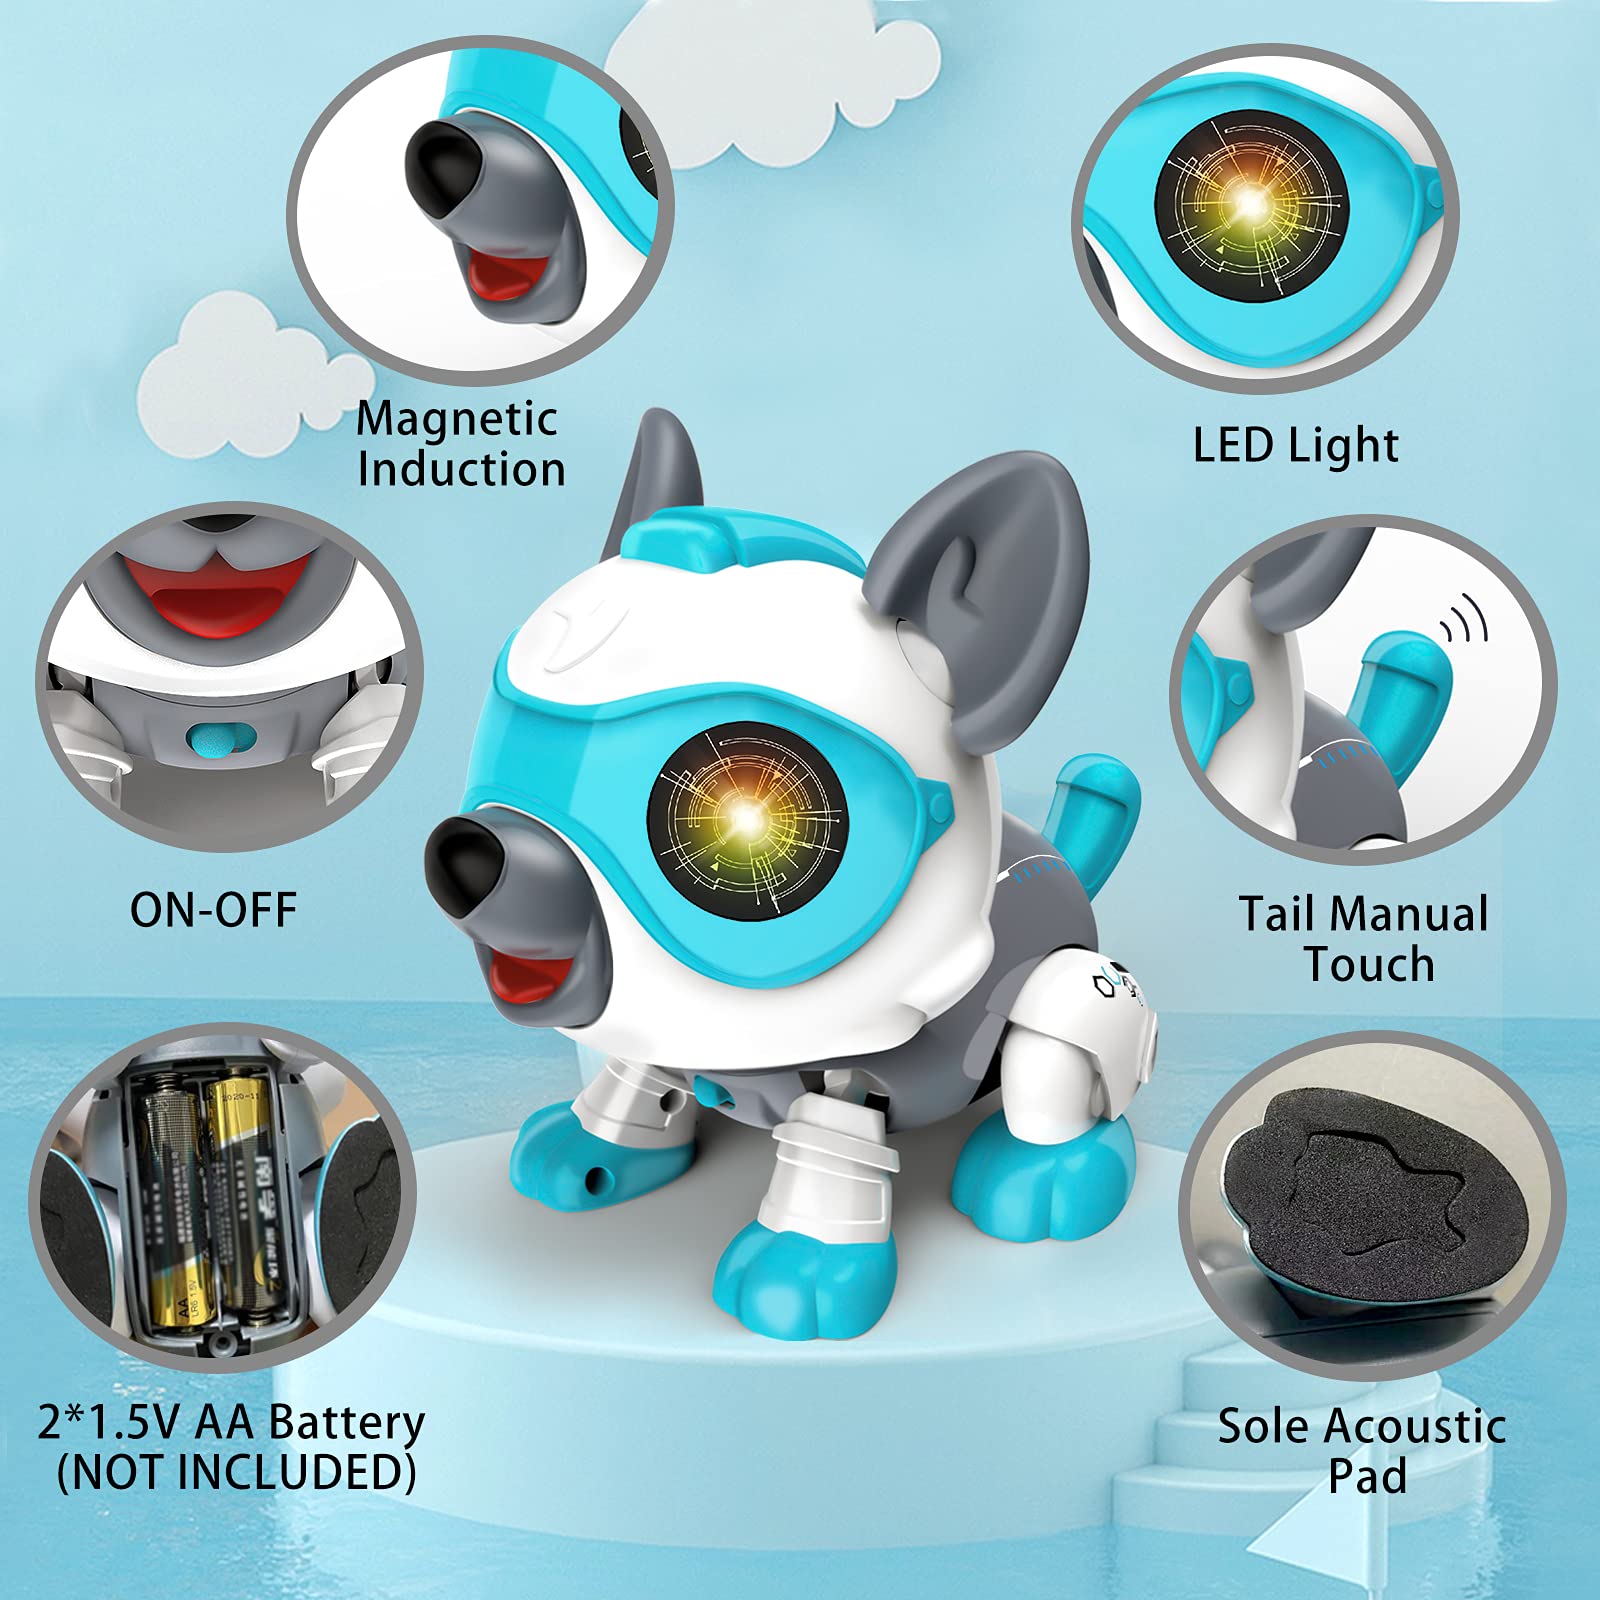 Robot Dog Toys for Kids, DIY STEM Toys for 3 4 5 6 7 8 Year Old Girls Boys, Interactive Electronic Puppy Pet with Touch Control, Educational Toys for Kids 5-7, Christmas Birthday Gifts for Kids